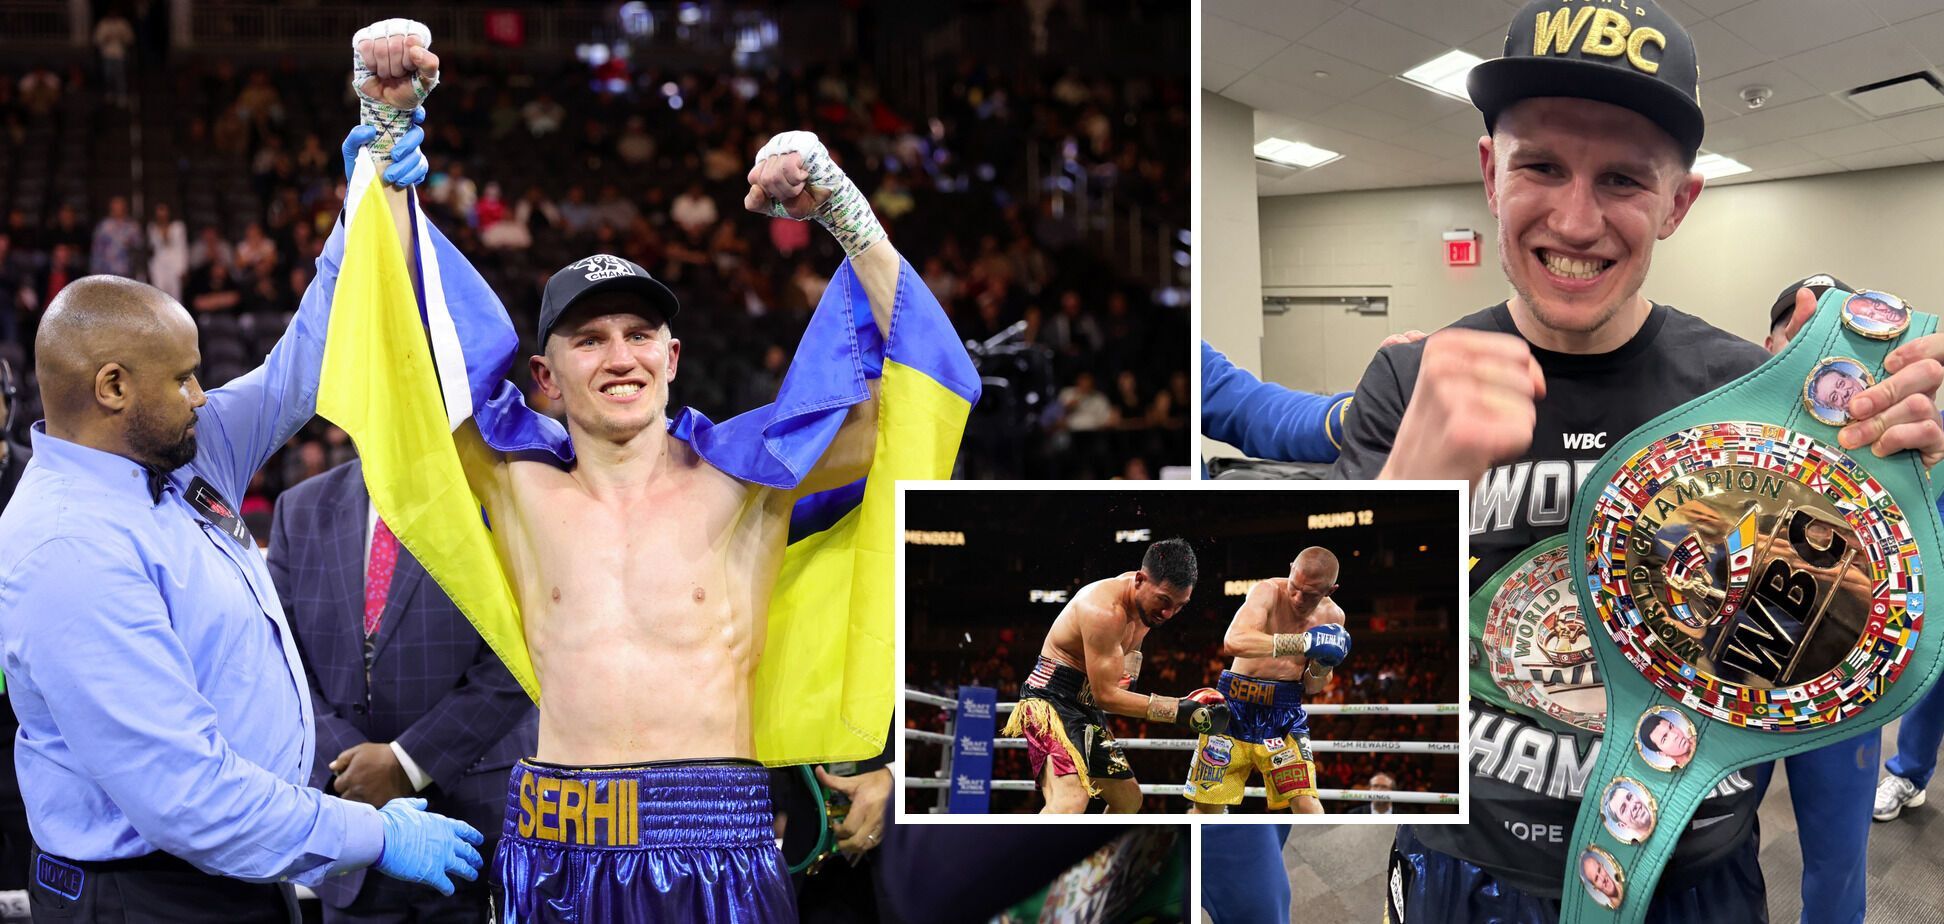 After his victory, the world boxing champion took the yellow and blue flag and said that ''Ukrainians are unbreakable.'' The audience in the United States responded with a standing ovation. Video